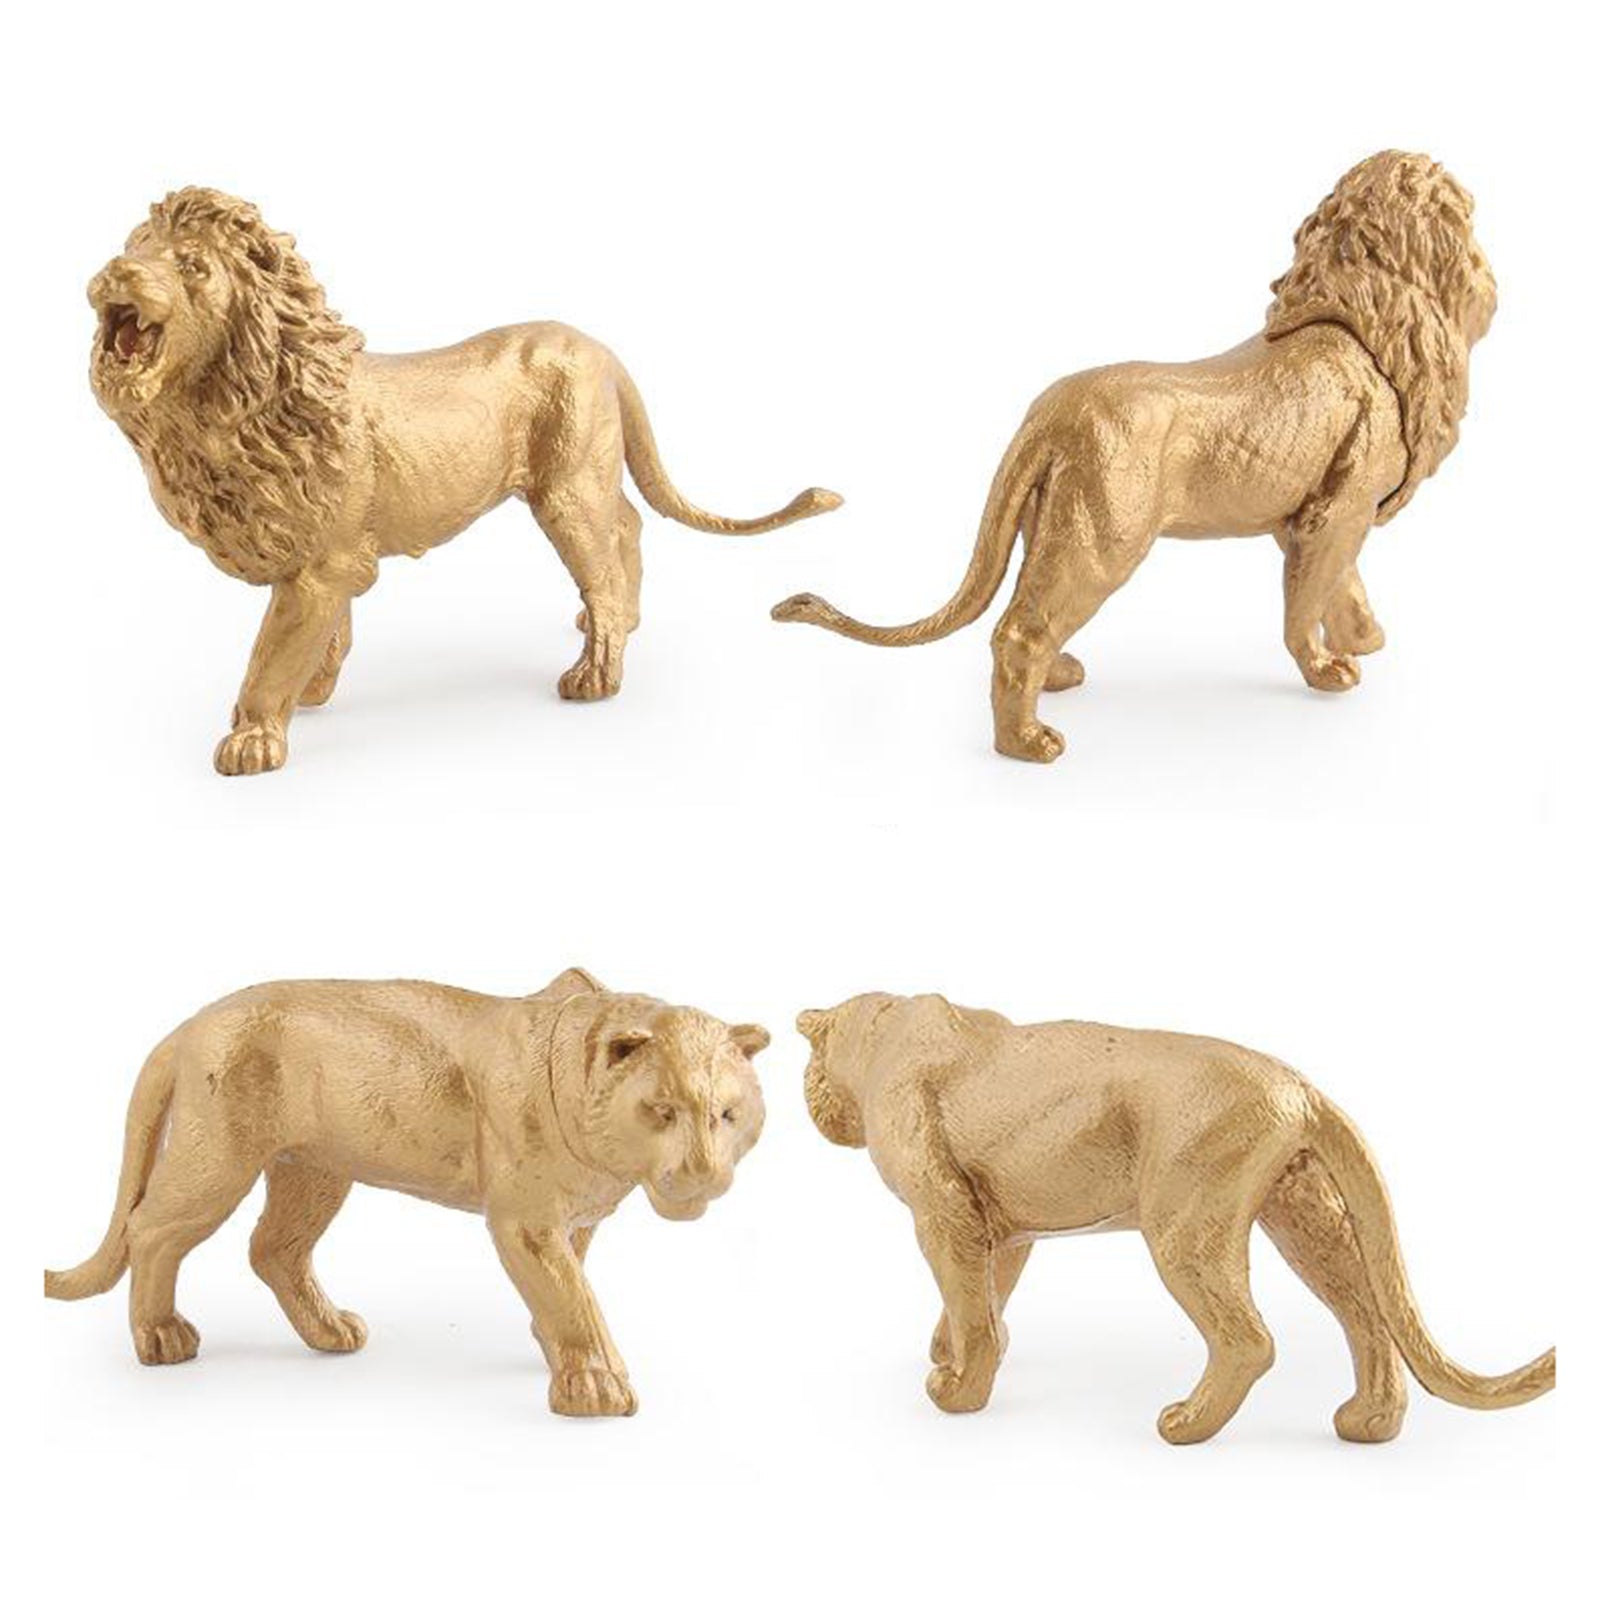 Animal Figures - 7pcs Realistic Golden Action Model Educational Forest Toys